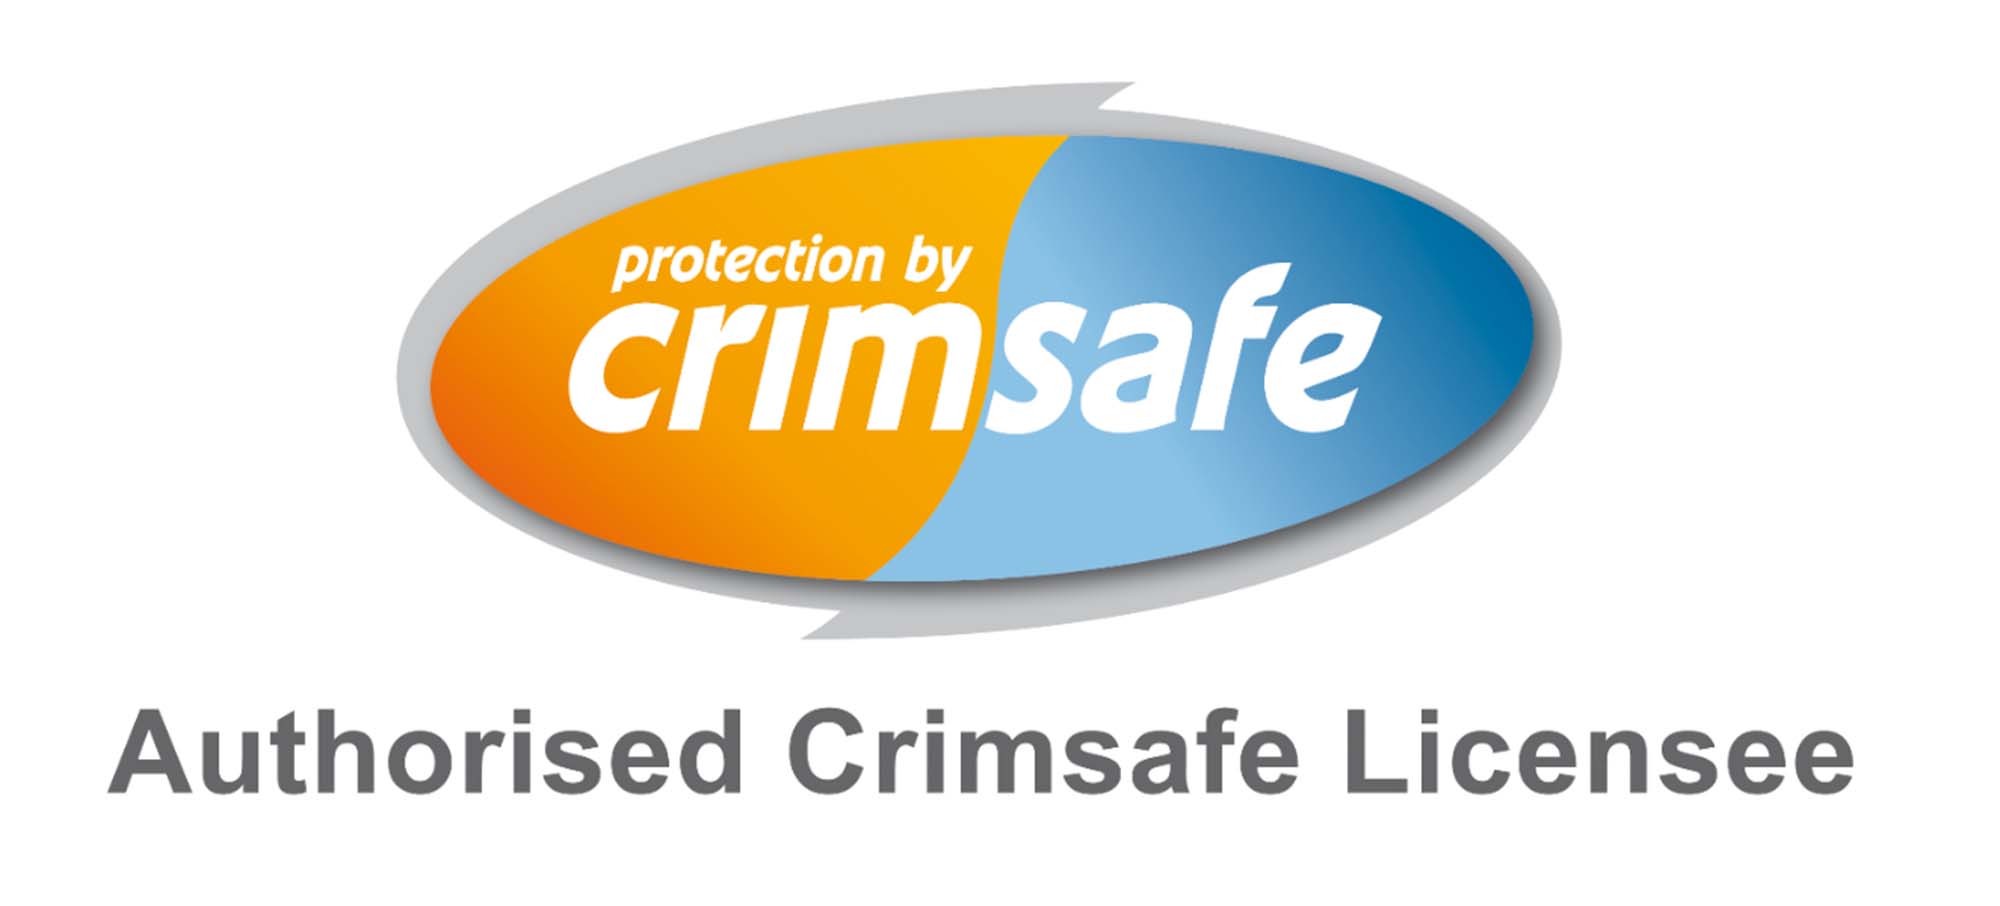 Crimsafe Authorise Licensee for 20 years!